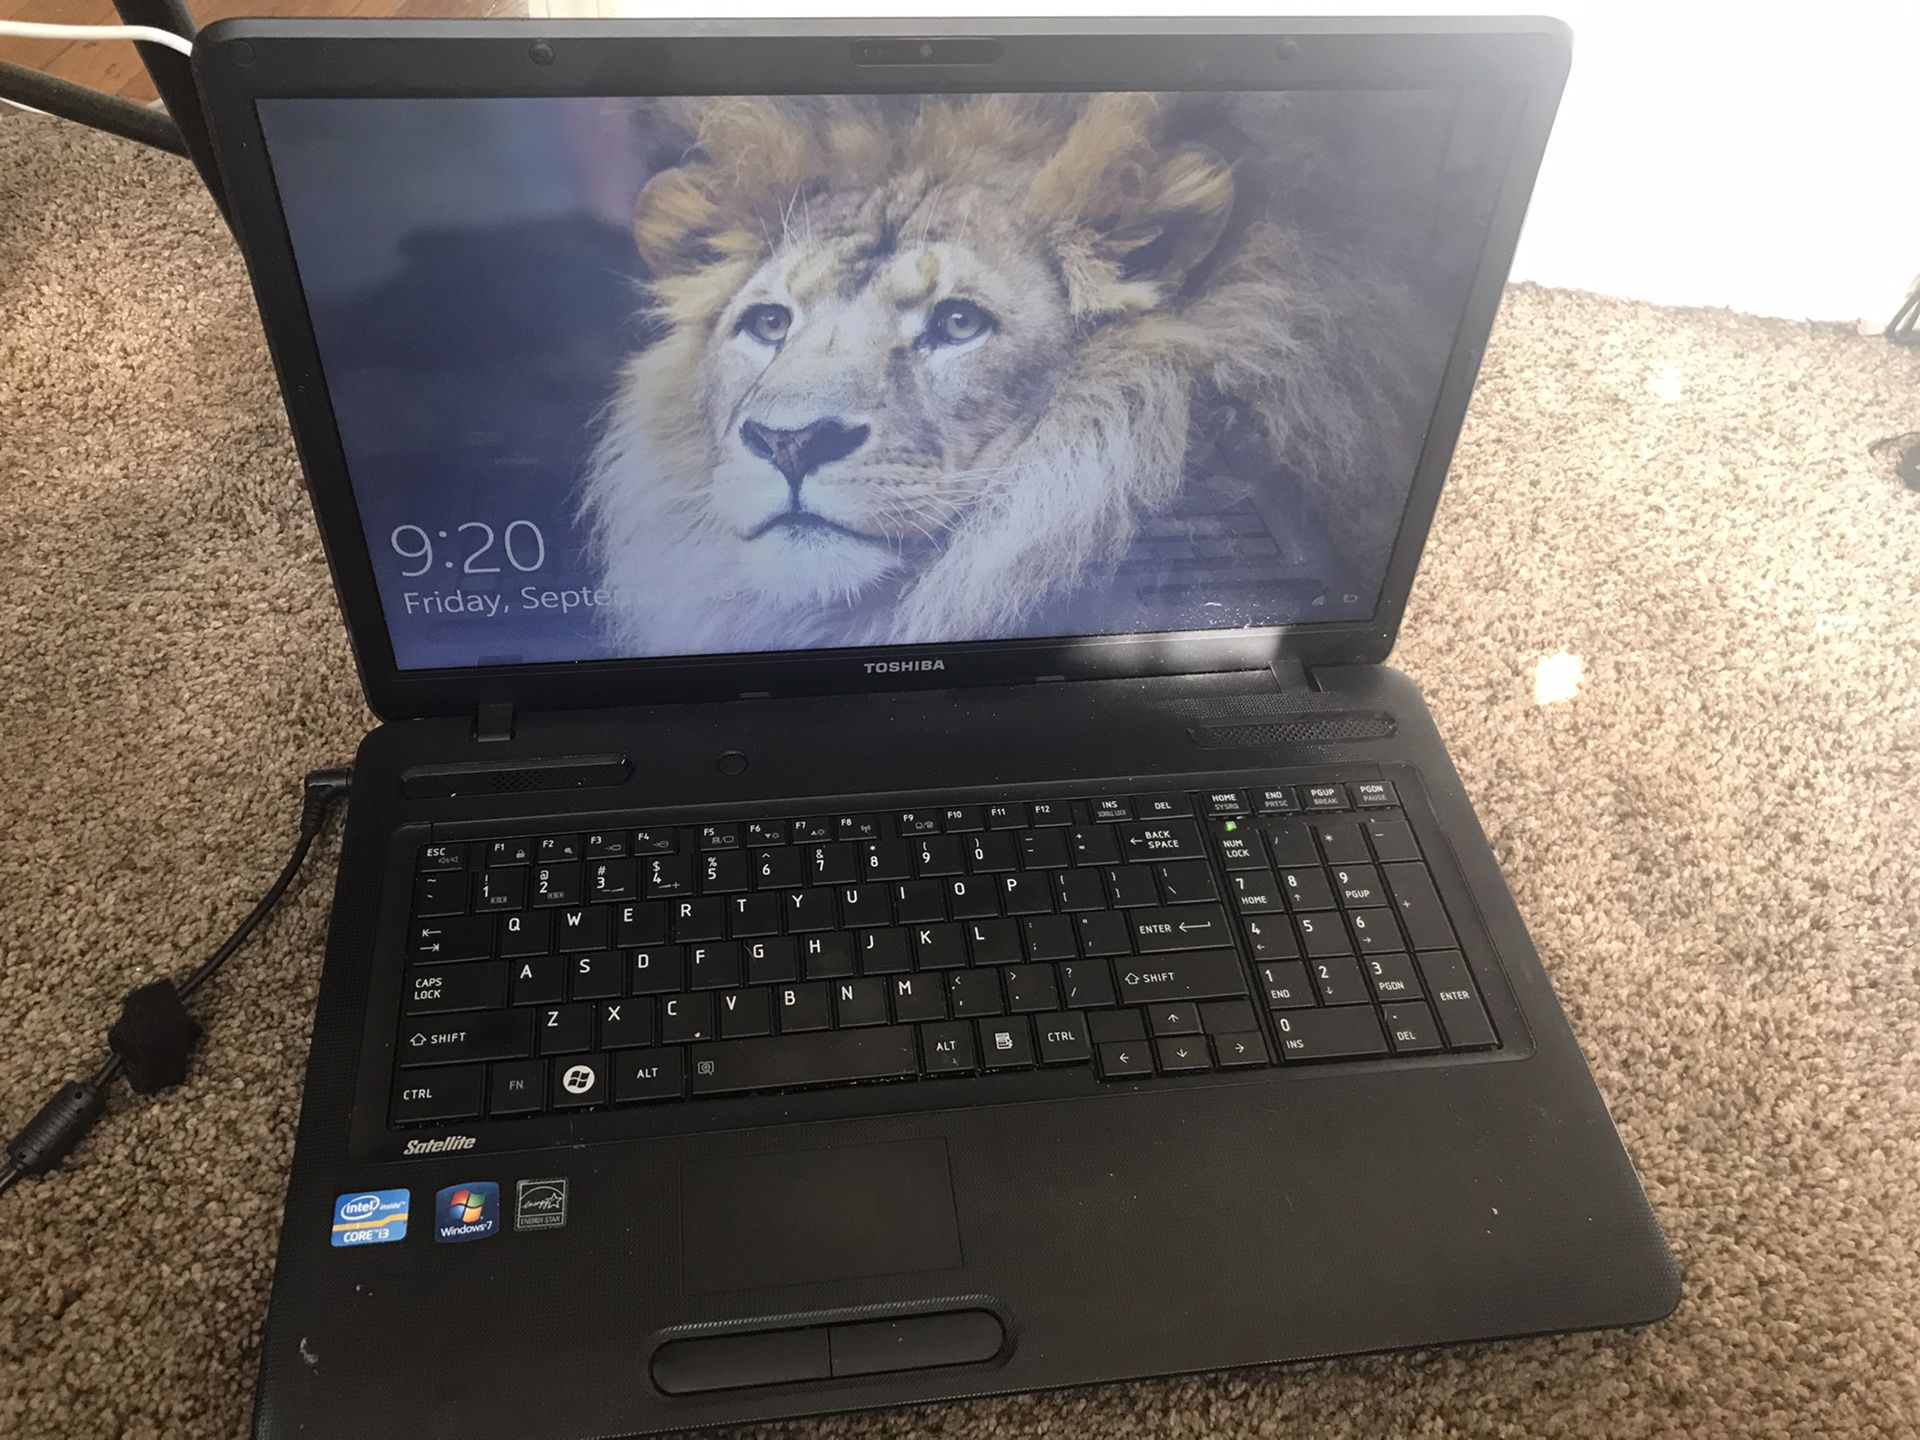 Toshiba laptop preloaded with Tons of VALUE‼️